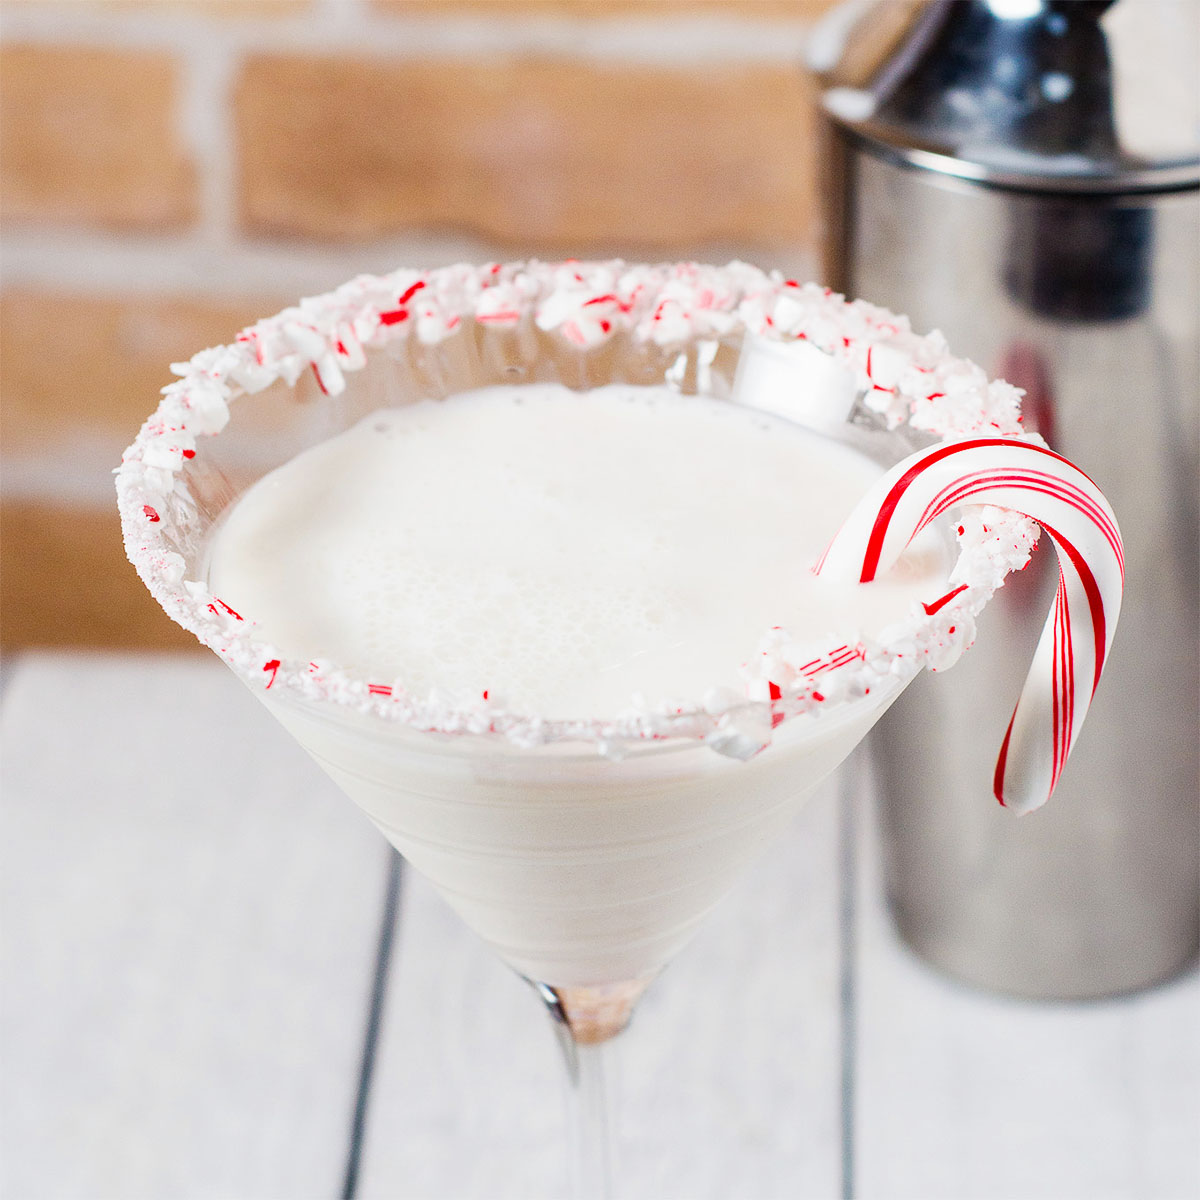 Candy cane martini garnished with a candy cane